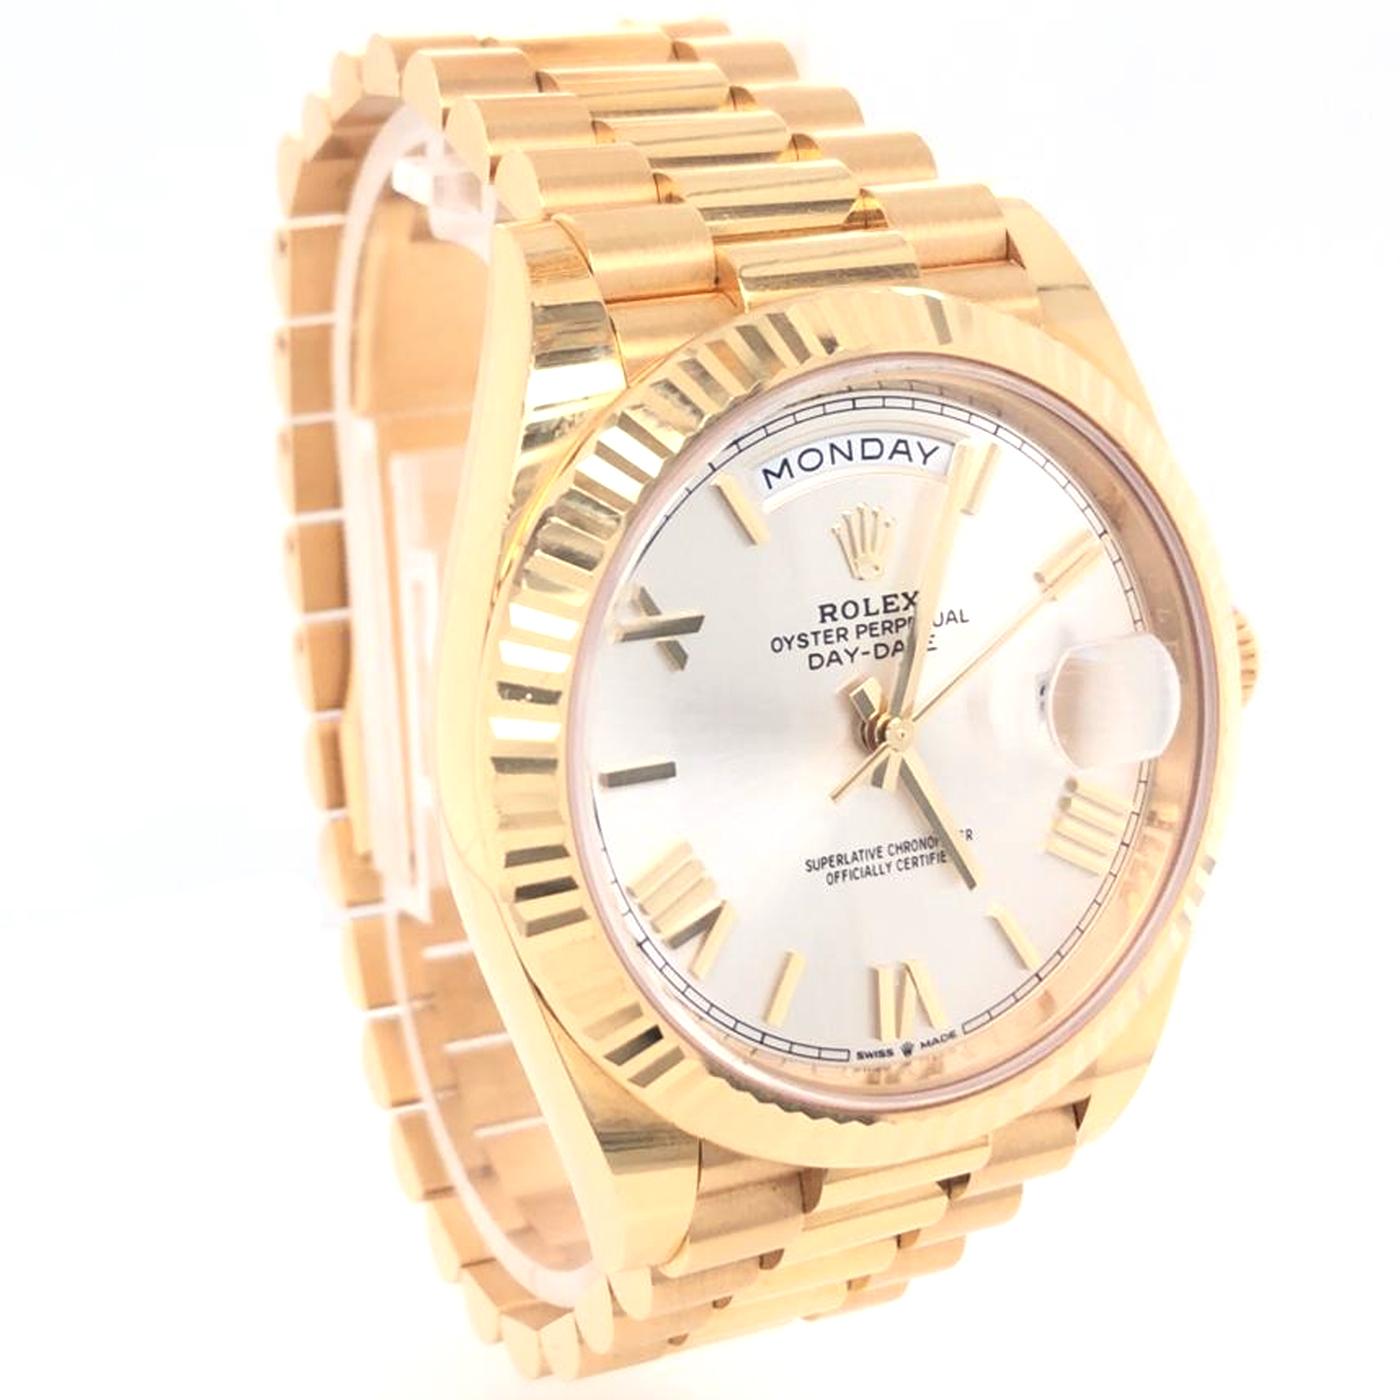 Rolex Day-Date Yellow Gold President Silver Roman Dial Watch 228238 In Excellent Condition For Sale In Aventura, FL